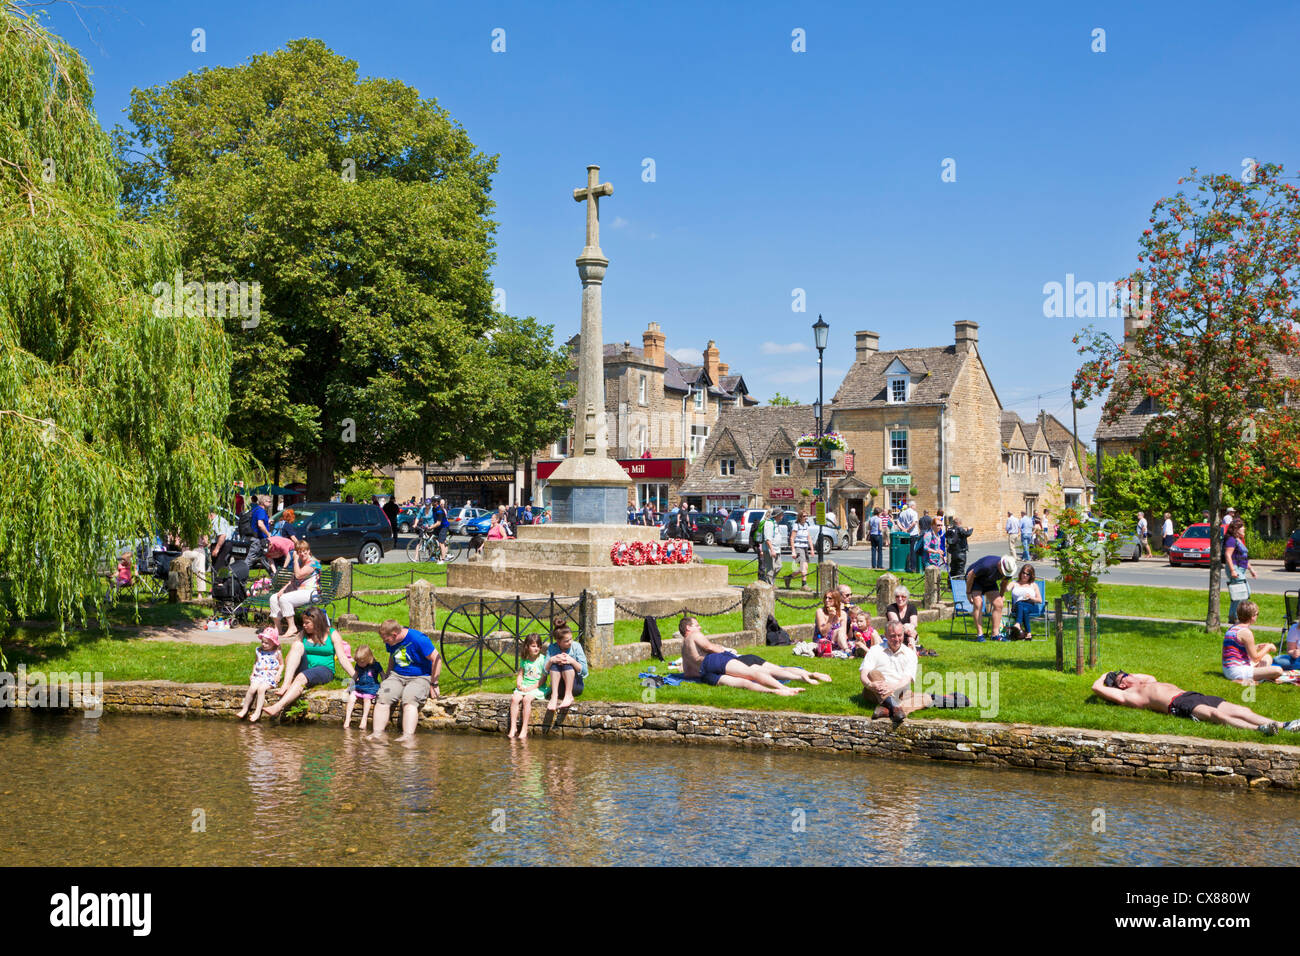 Cotswolds village of Bourton on the water with Tourists on The Green Bourton on the Water Cotswolds Gloucestershire England UK GB Europe Stock Photo